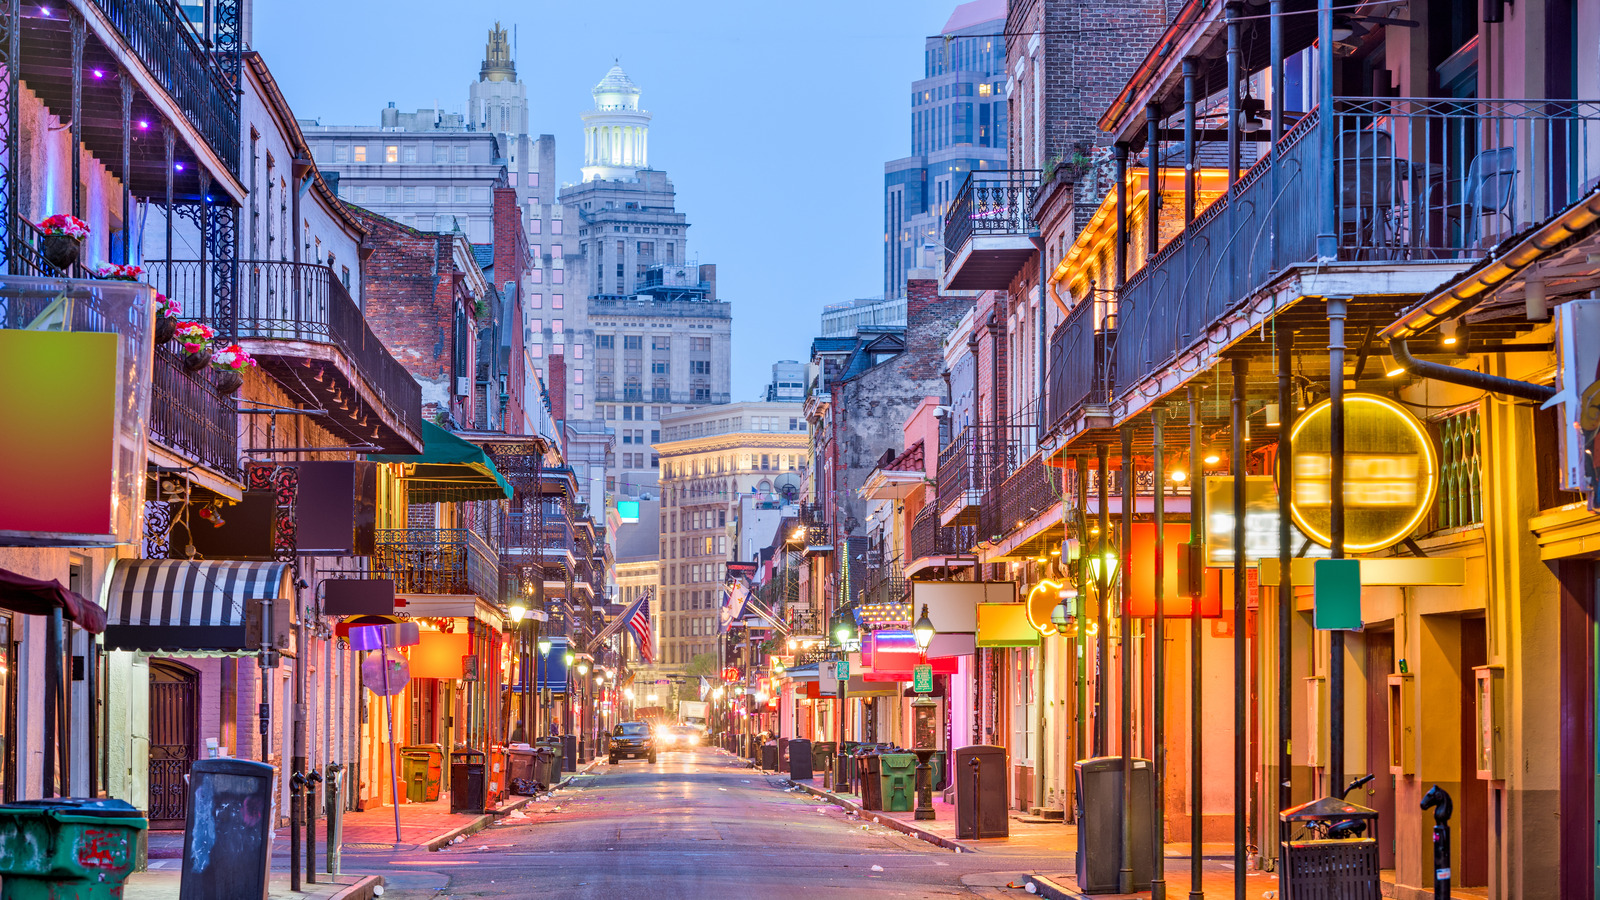 Fun Activities to Do Around New Orleans: College Student Edition